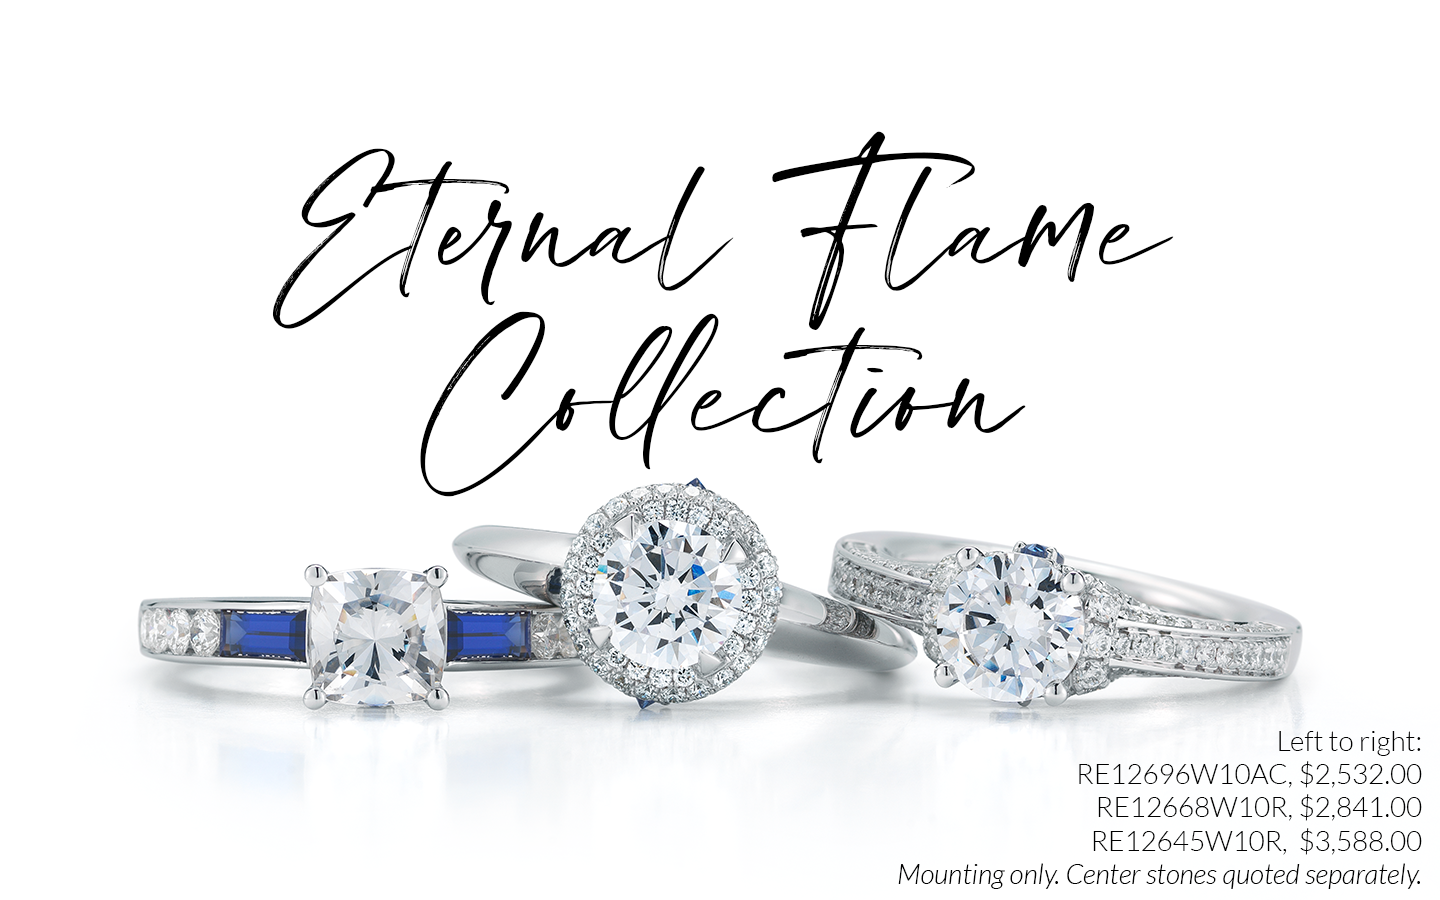 Eternal Flame Collection: RE12696W10AC - $2,532.00, RE12668W10R - $2,841.00, RE12645W10R - $3,588.00. Mounting only. Center stones quoted separately